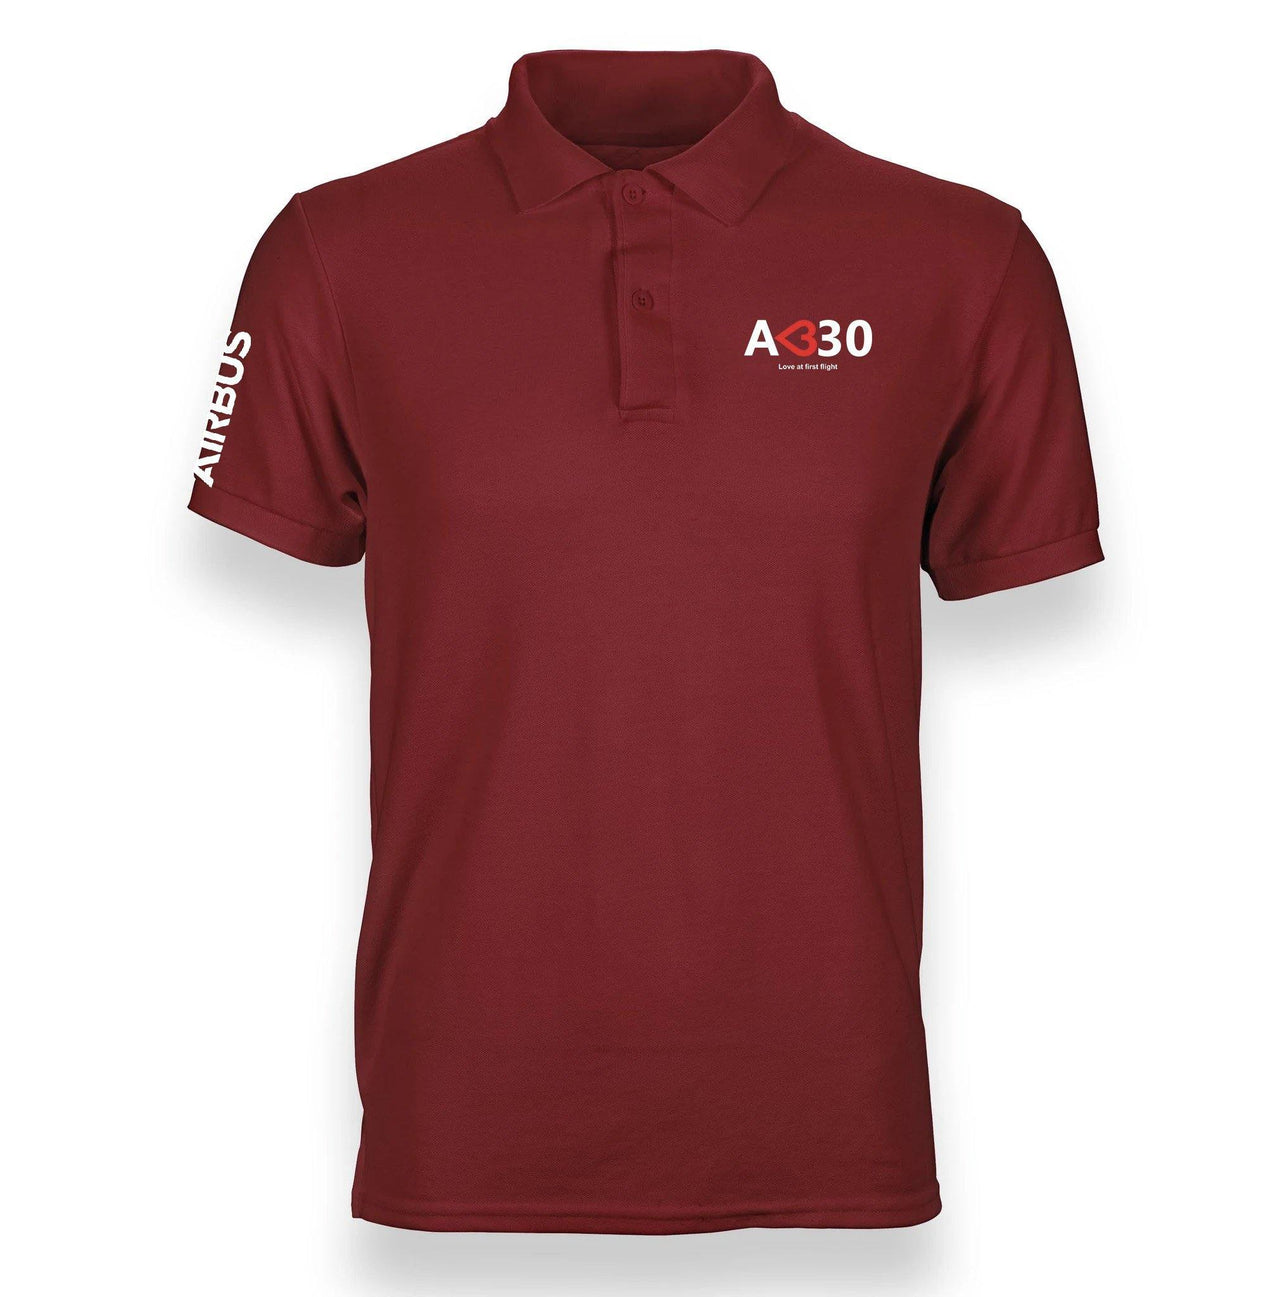 AIRBUS A330 LOVE AT FIRST FLIGHT DESIGNED POLO SHIRT THE AV8R